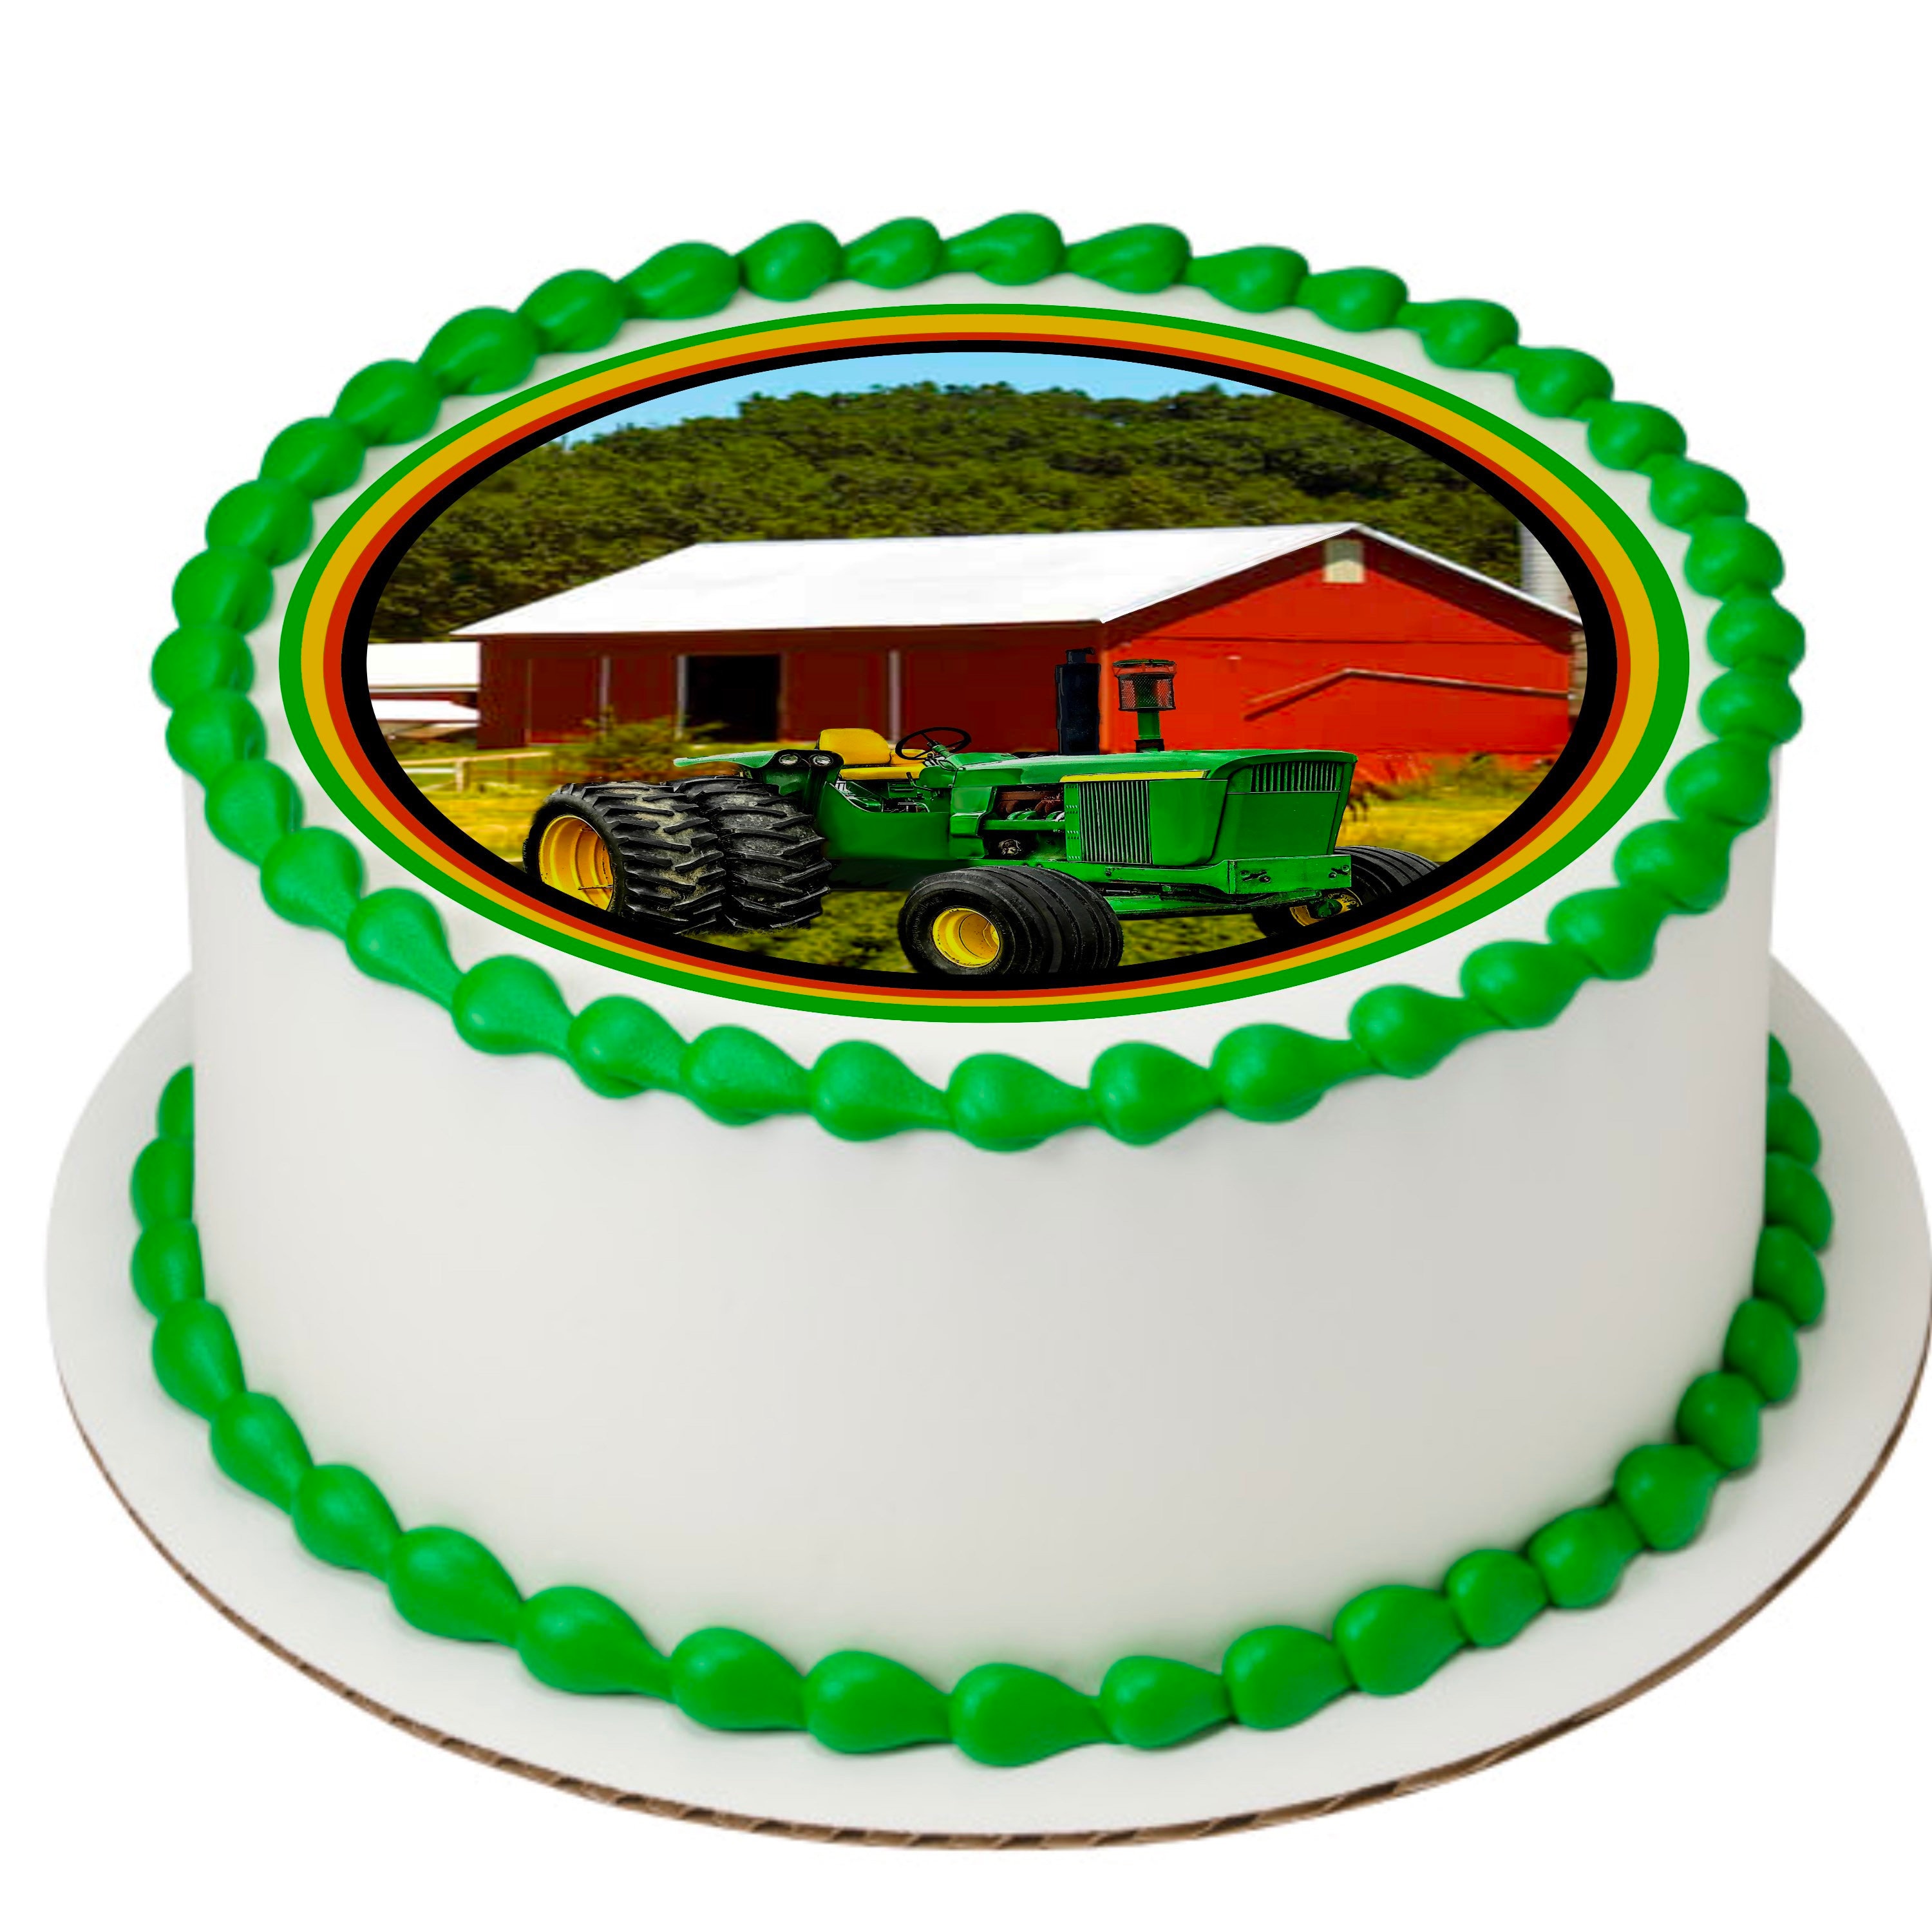 Buy Tractor and Farm Scene Edible Image for Cake Cupcakes Online in India -  Etsy